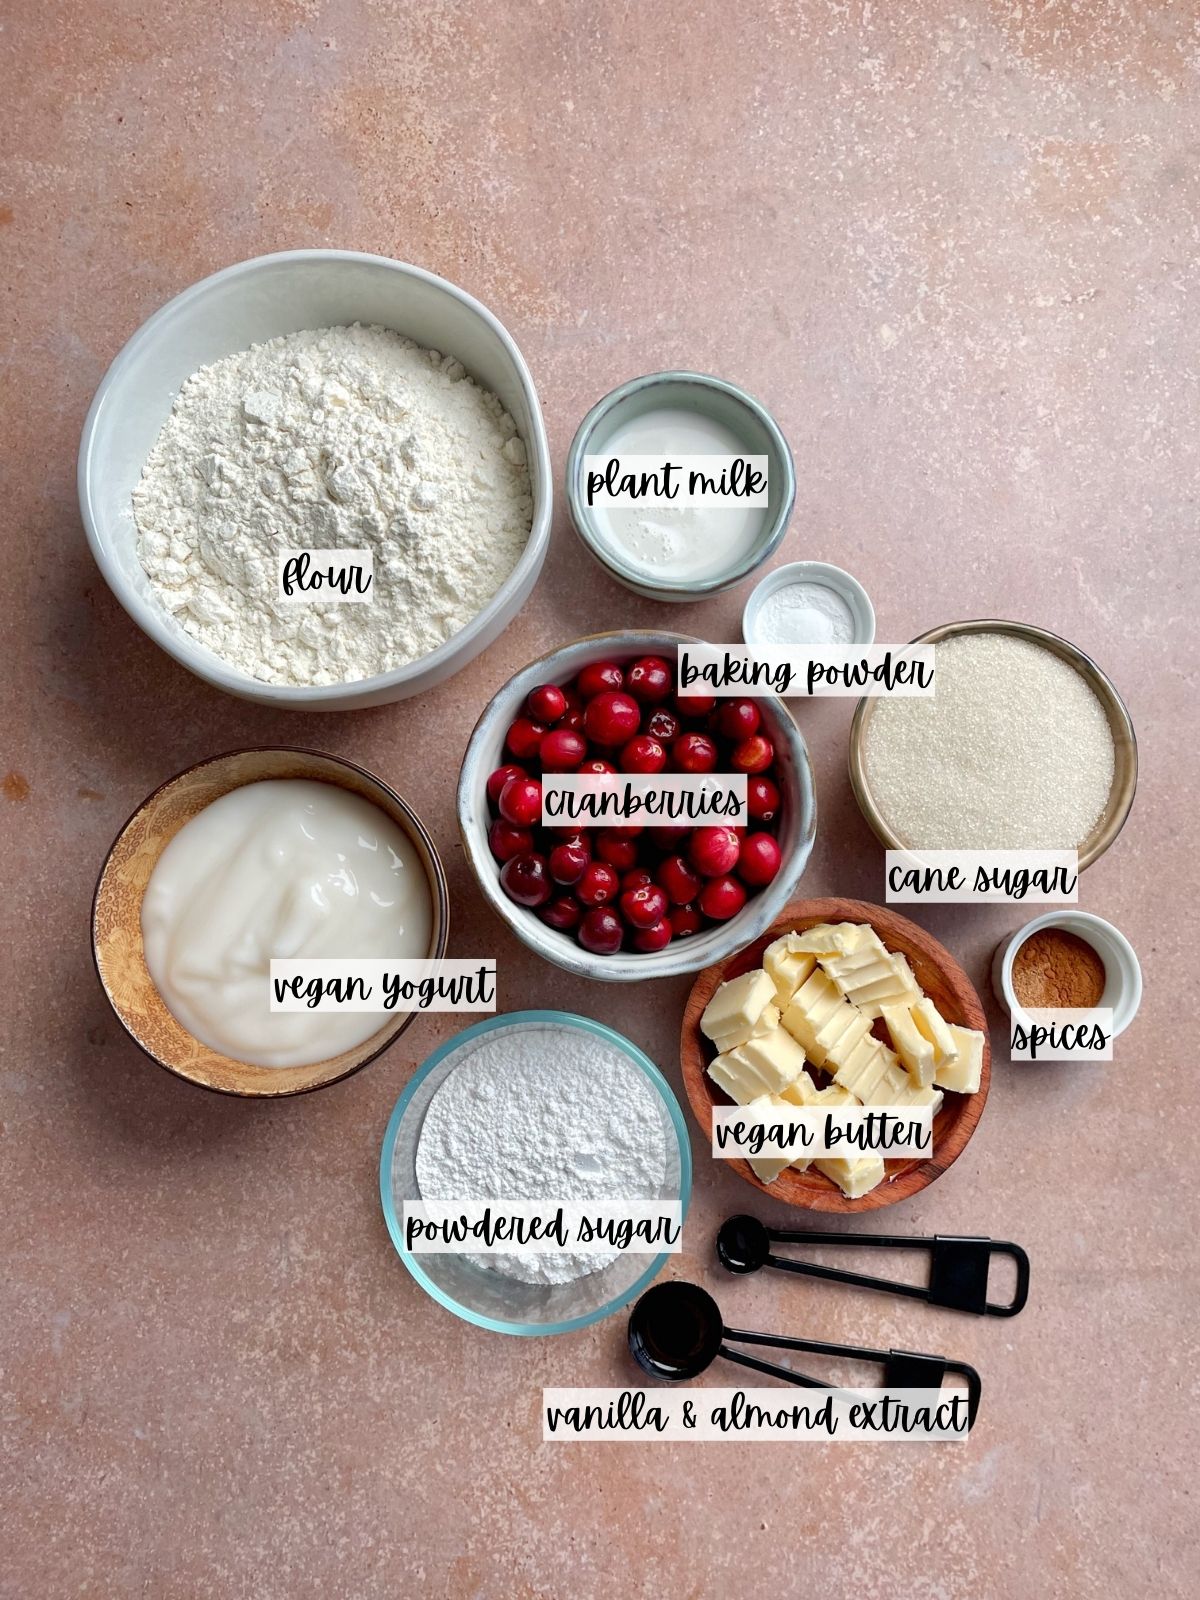 Labeled ingredients for cranberry scones.